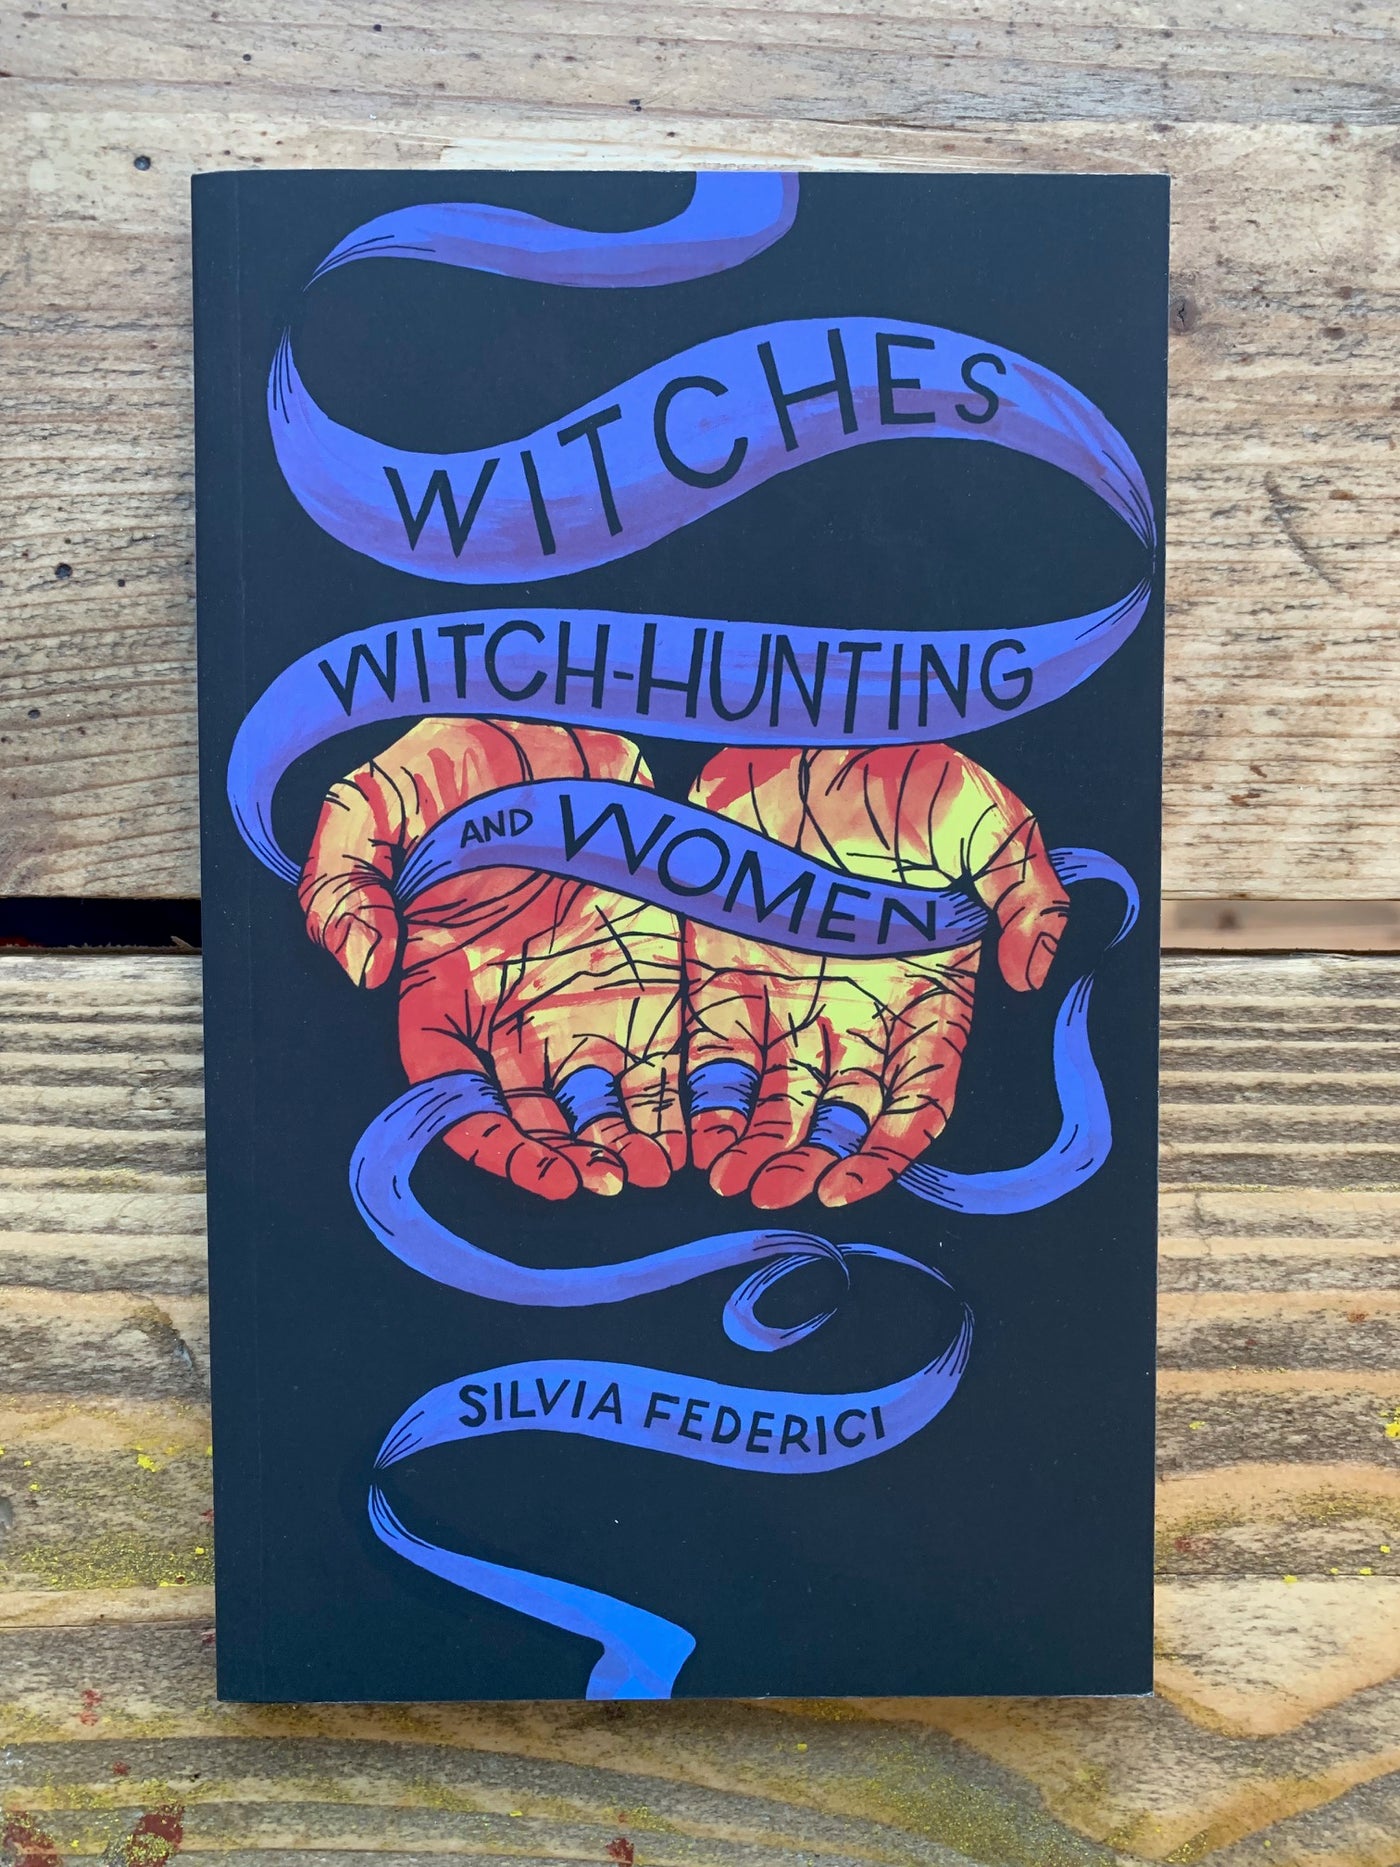 Witches, Witch-Hunting, And Women